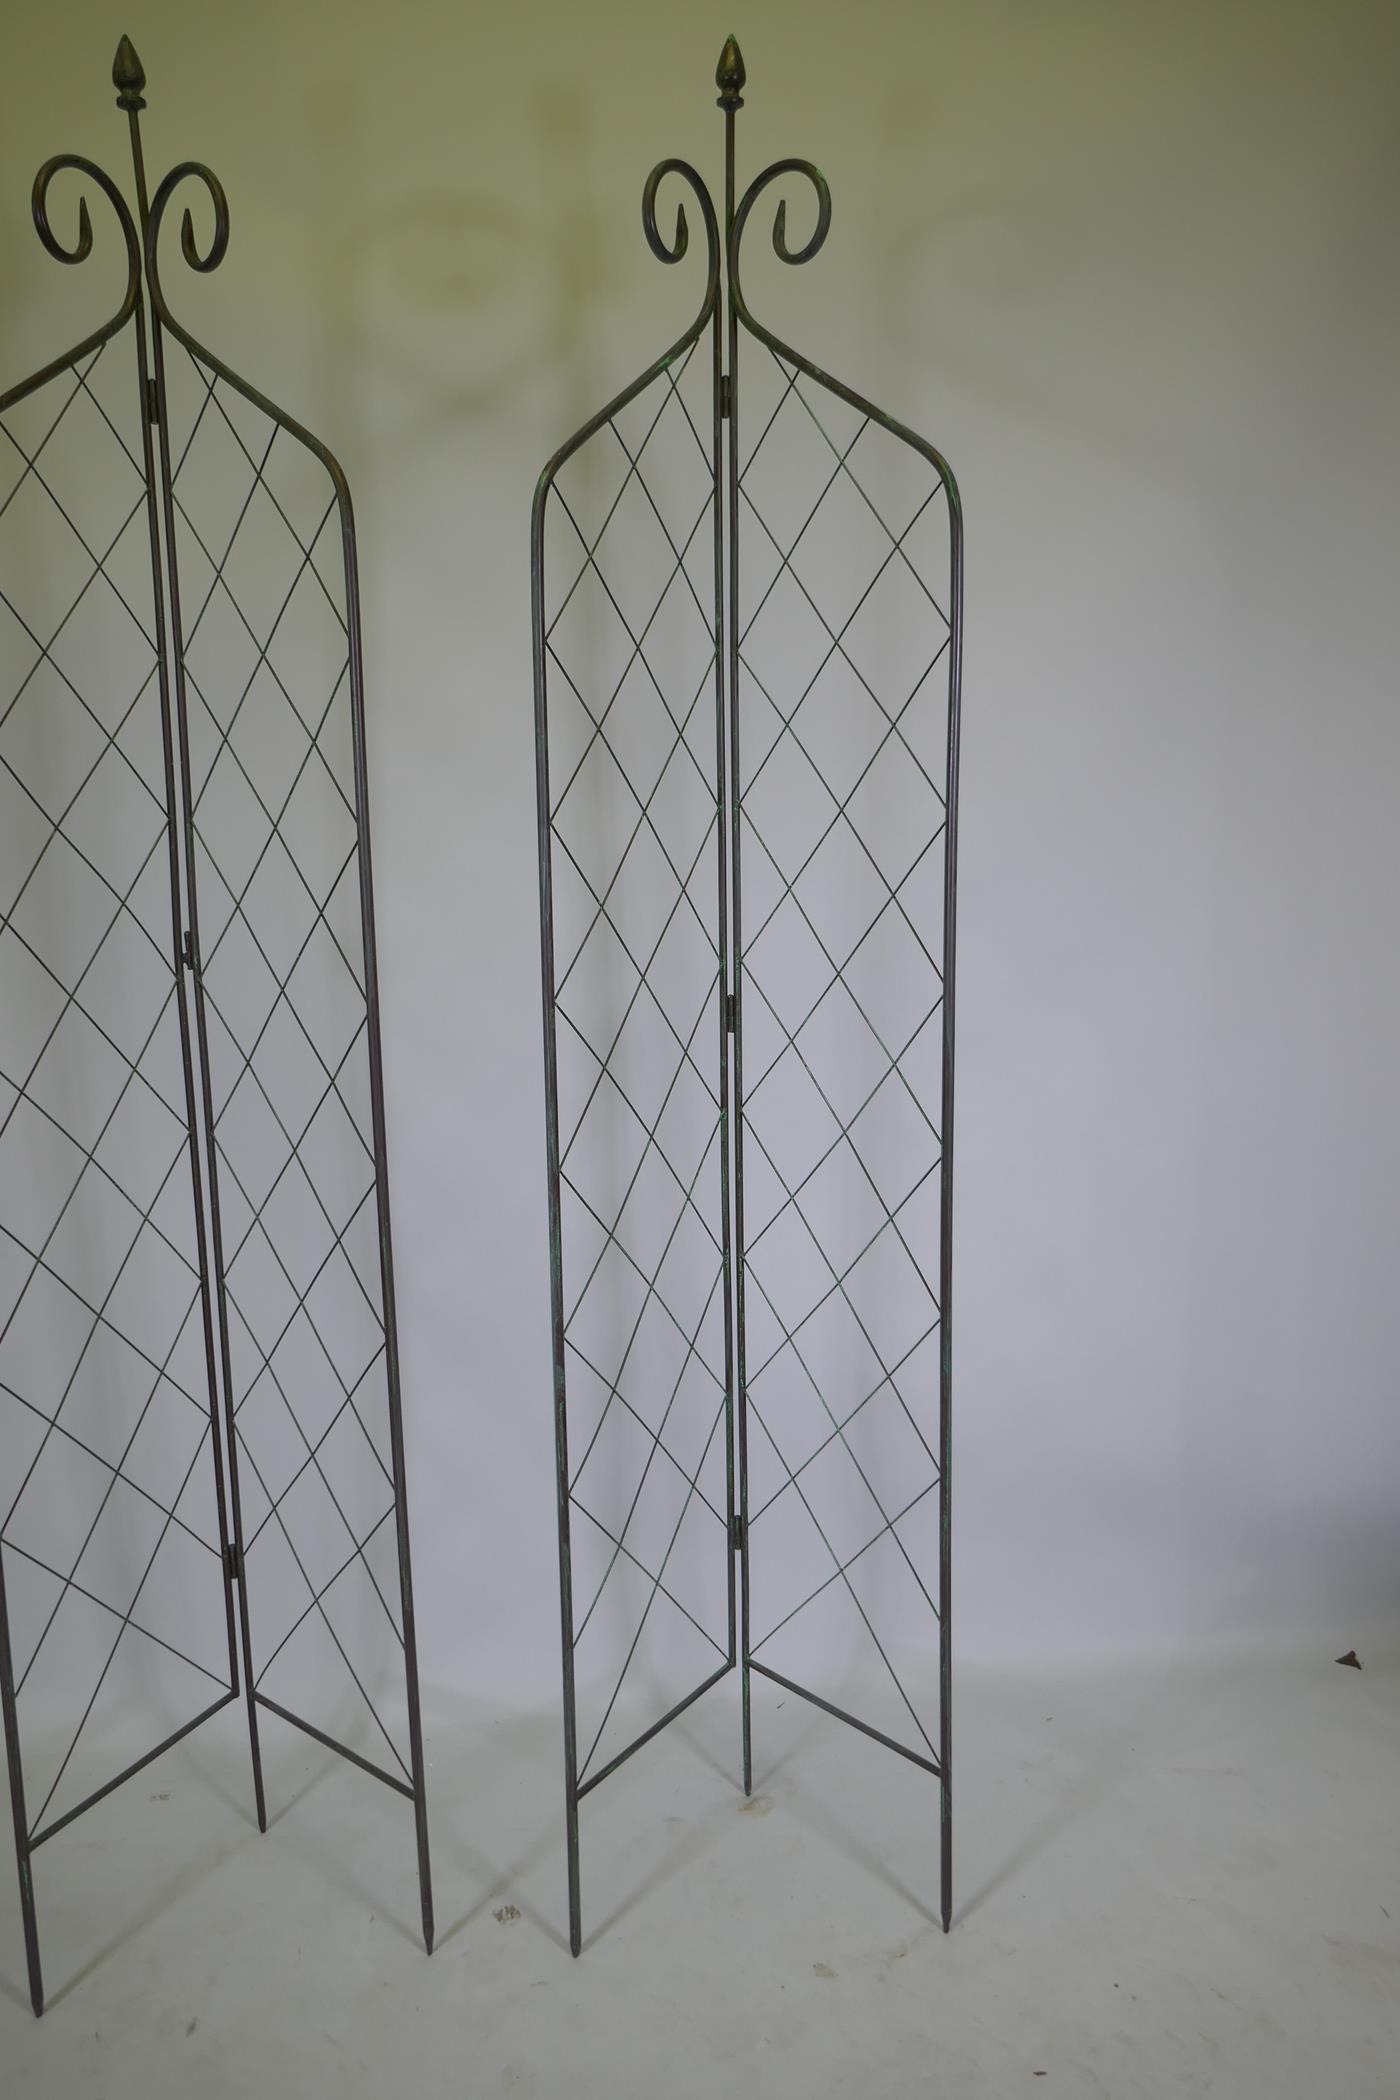 A pair of bifold metal plant supports, 210cm high - Image 2 of 2